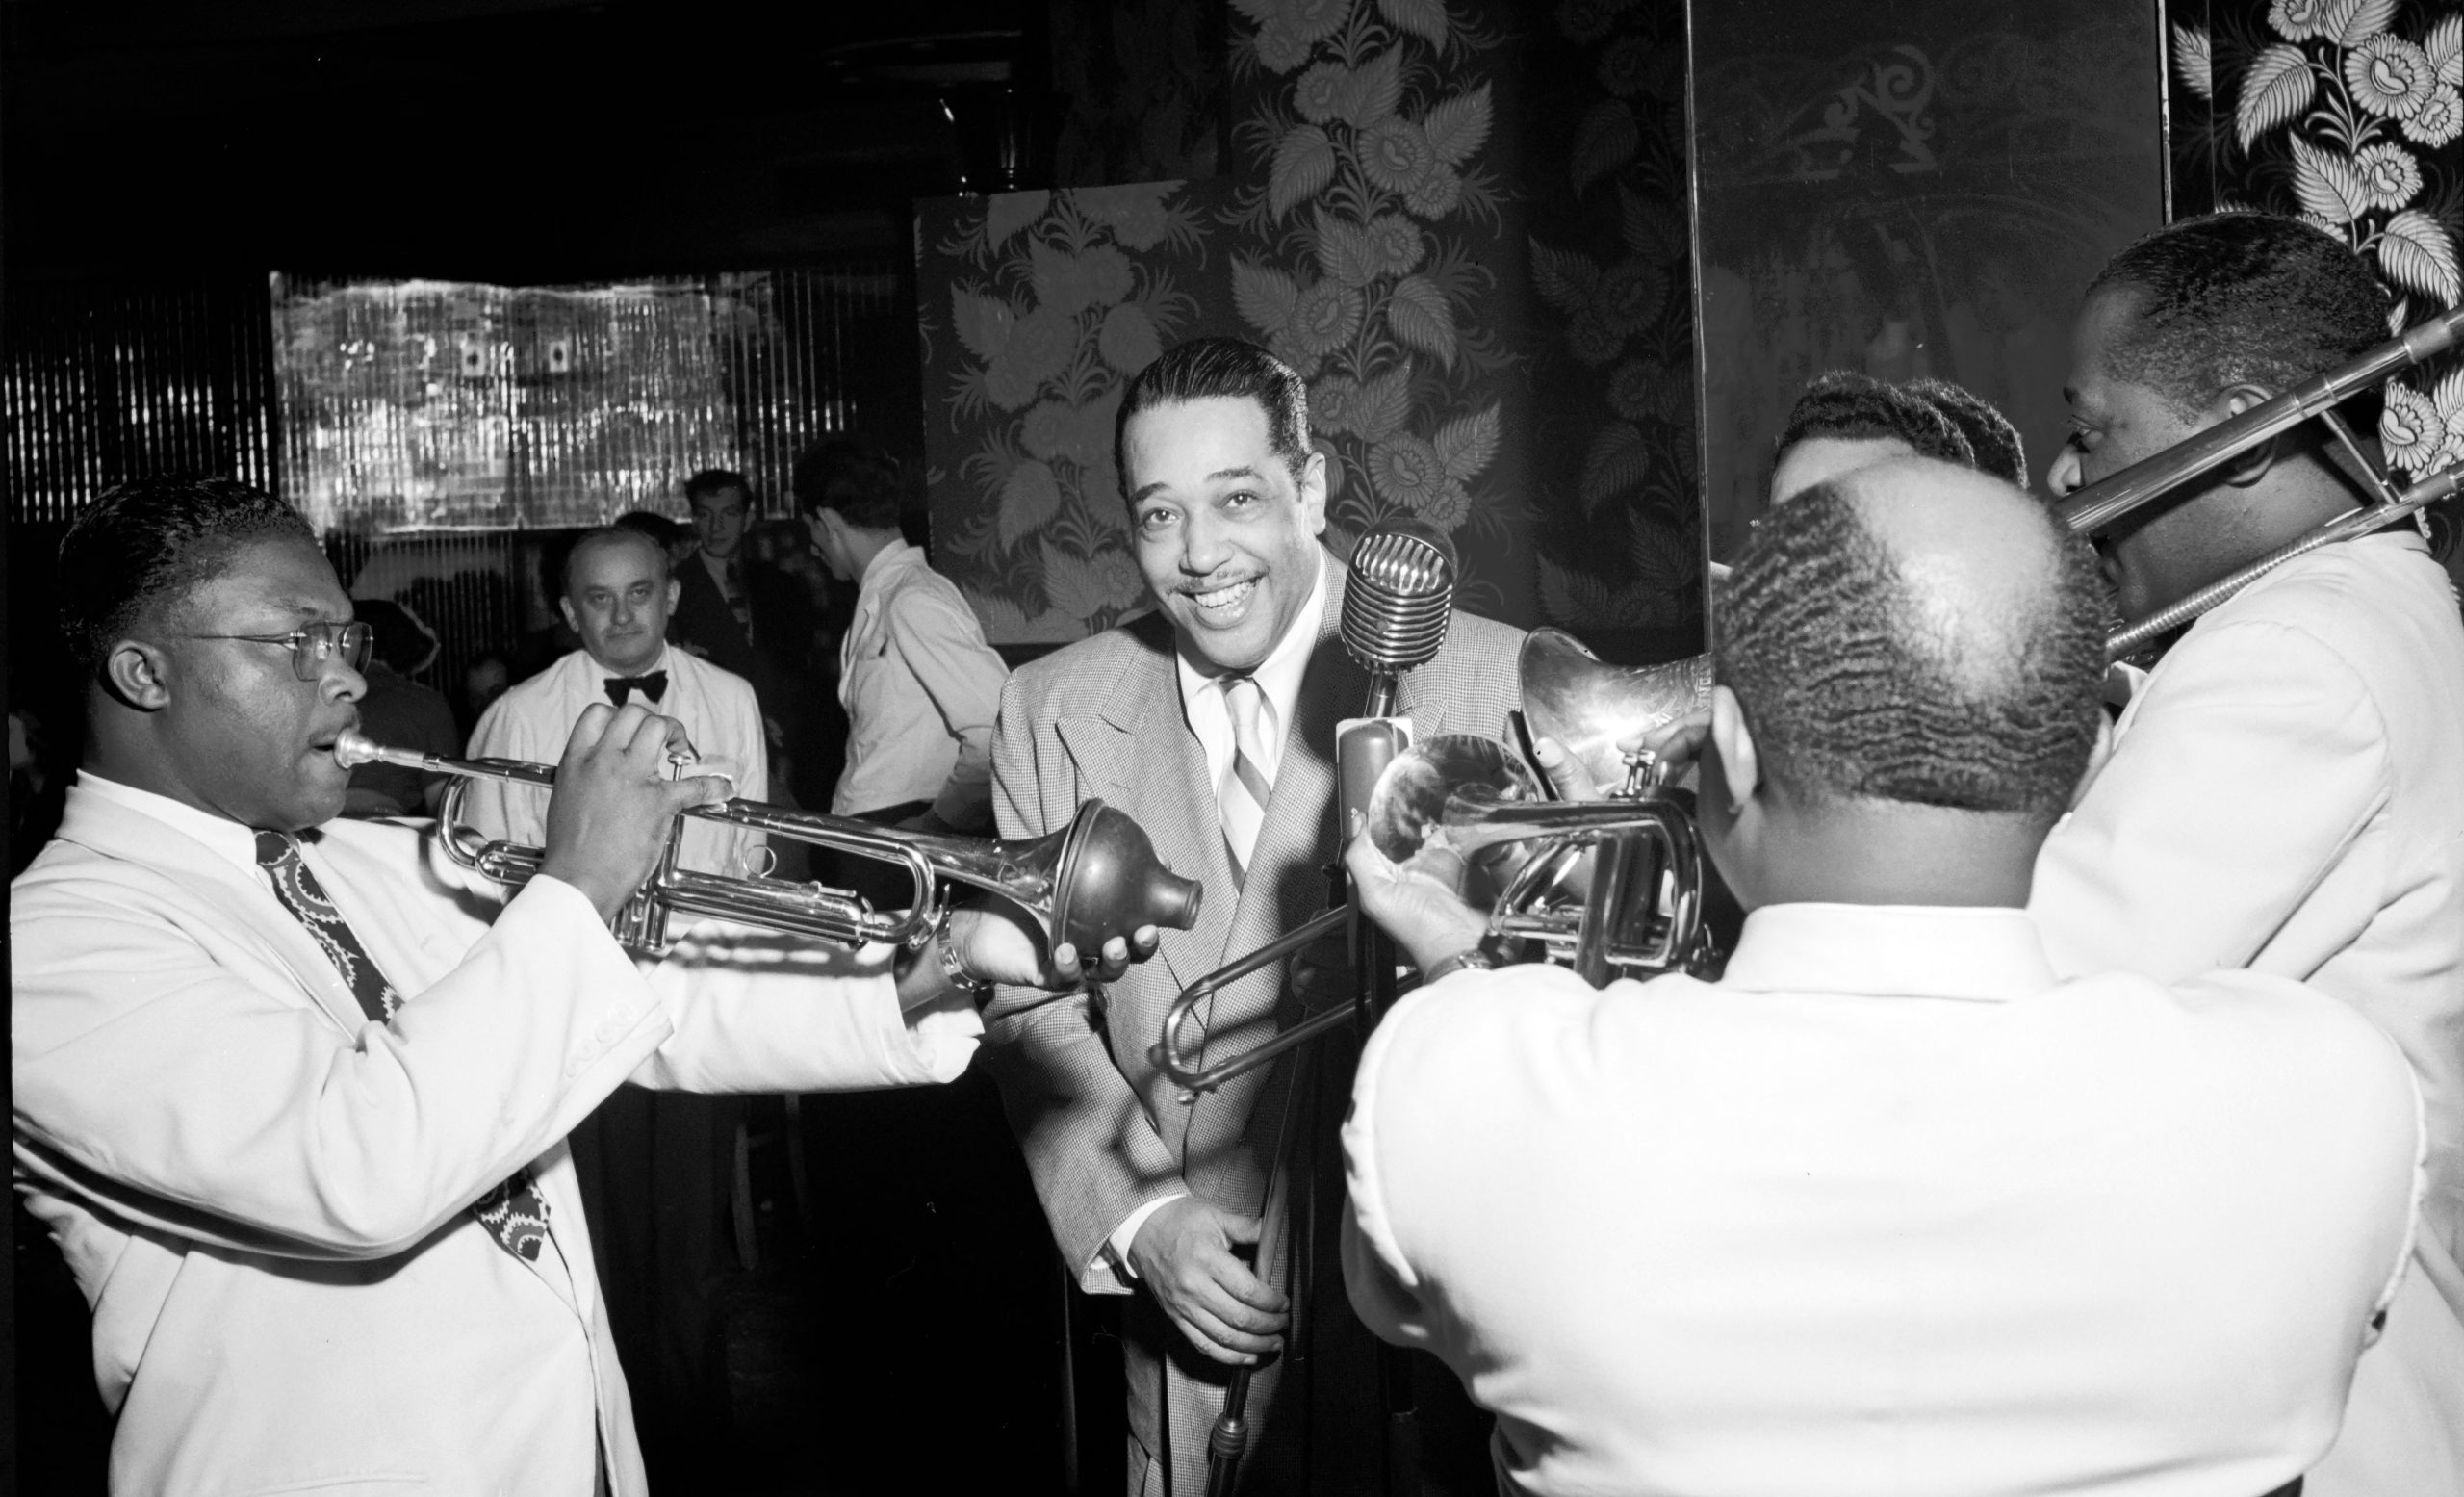 Duke Ellington surrounded by other musicians playing metals.